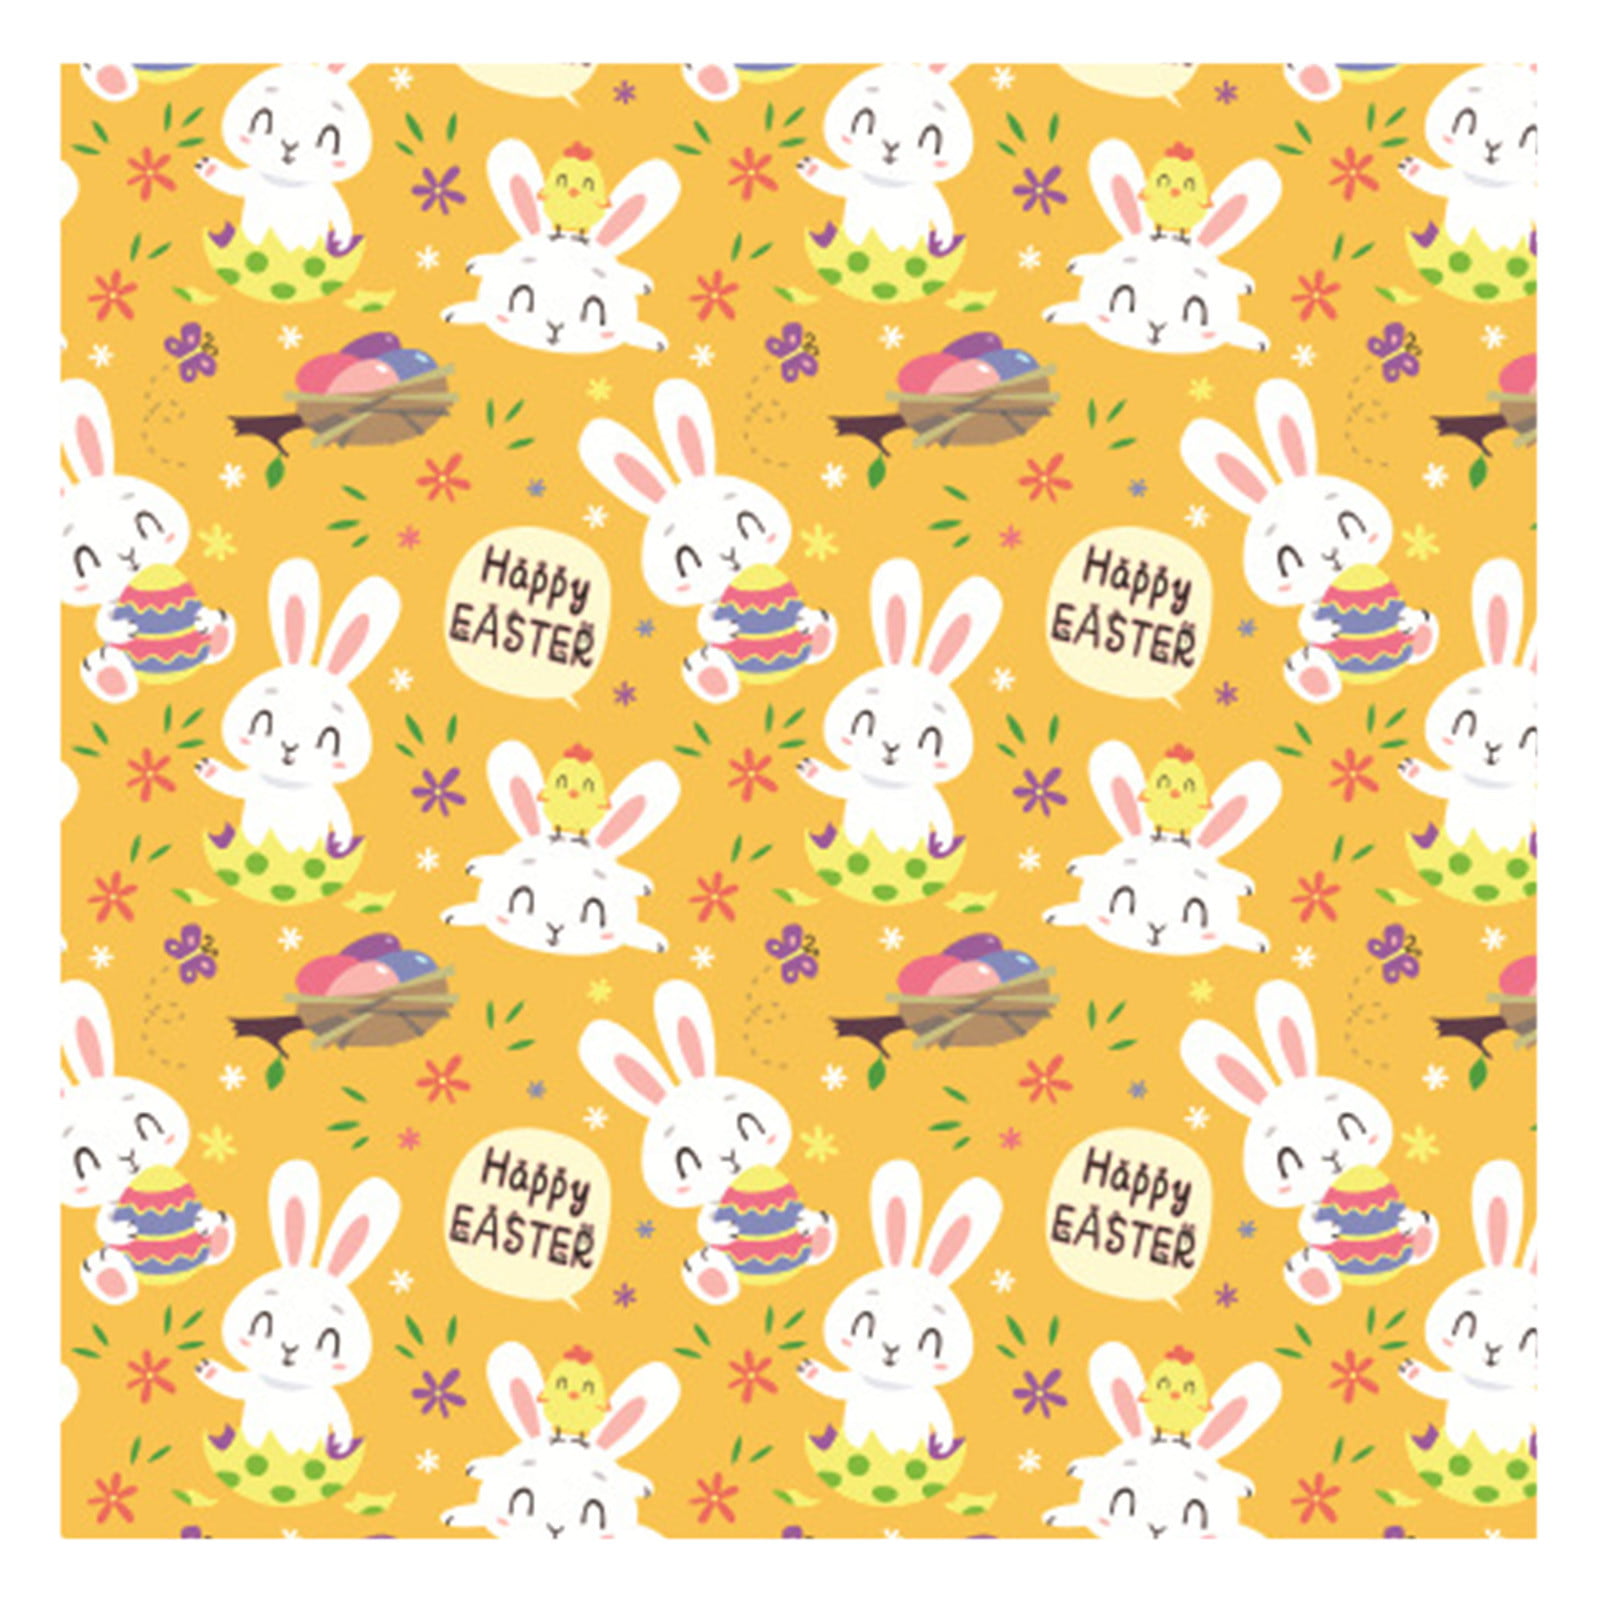 Personalised Easter Bunny Wrapping Paper Roll, Gift Wrap Easter Gifts  Cards, Wrap Easter Basket Eggs, Fun Cute Pretty Rabbit Hunt Boy  